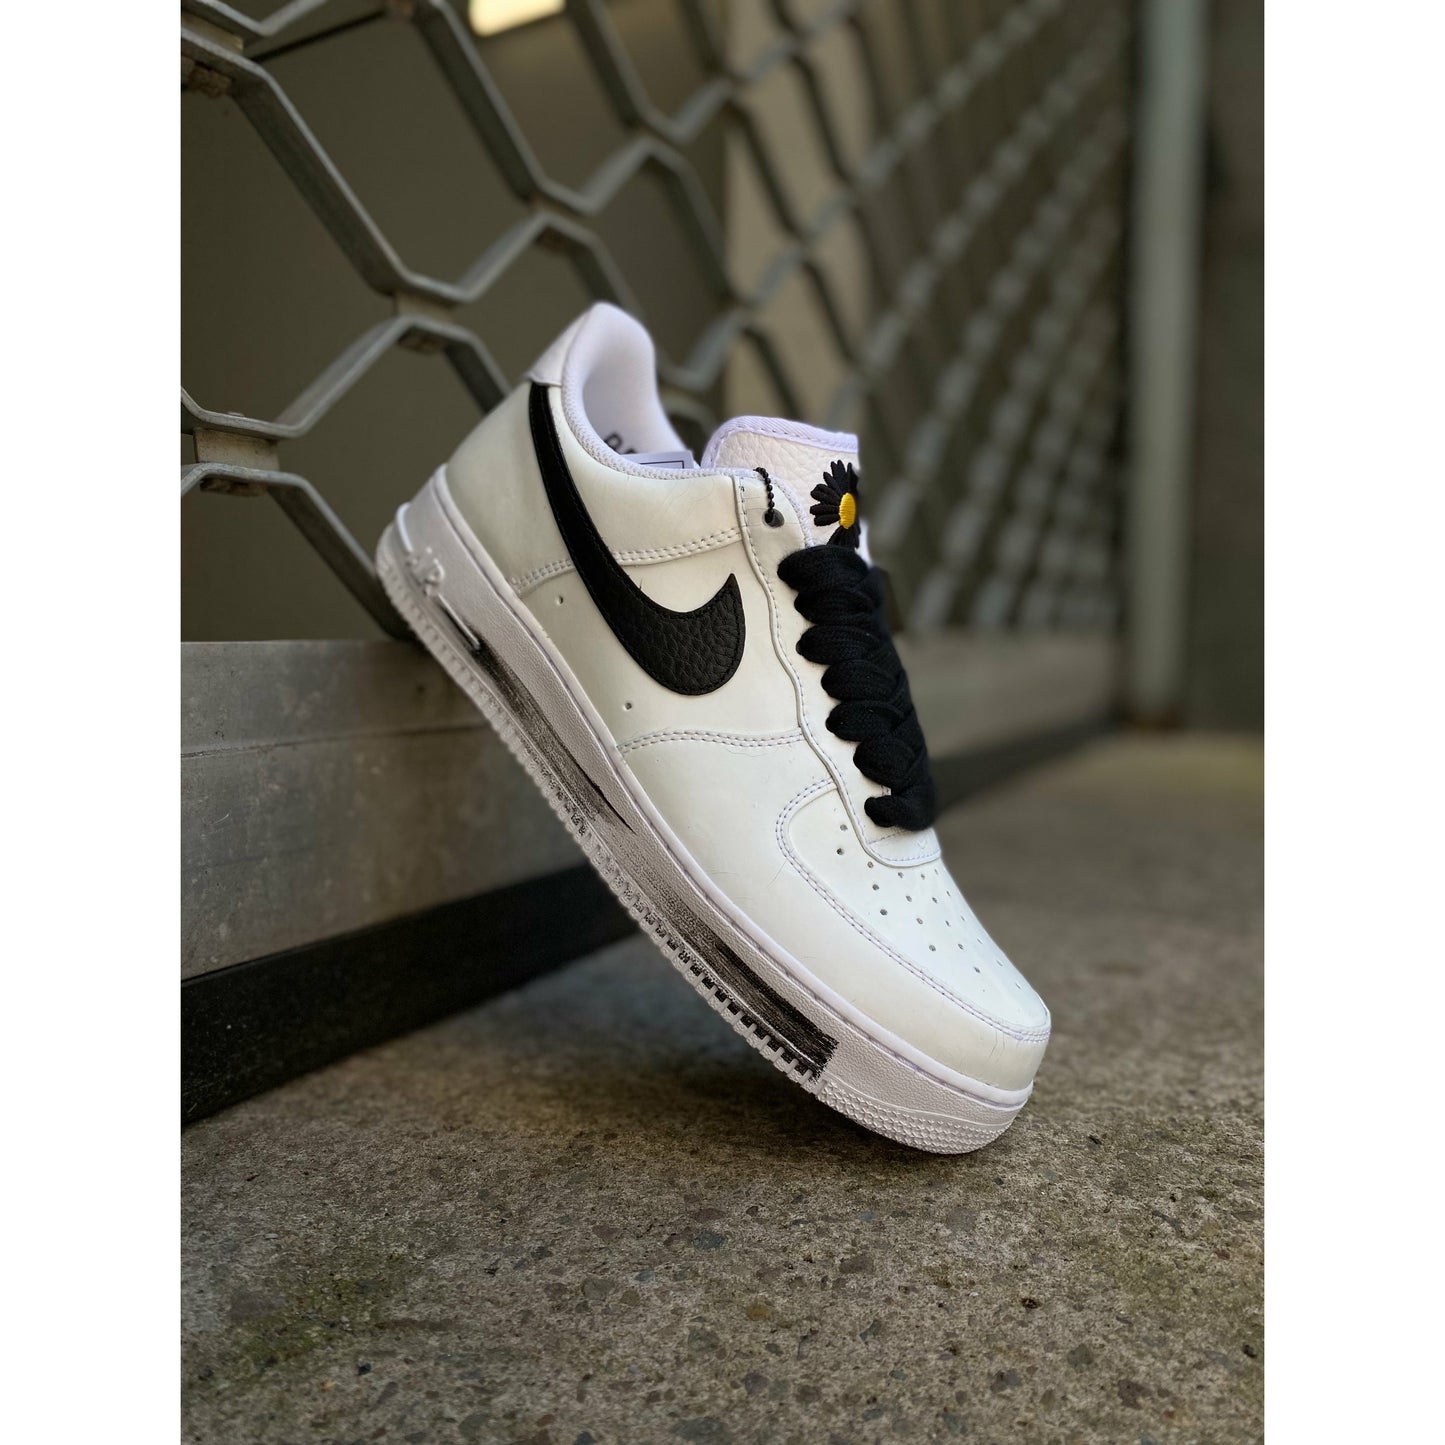 Nike Air Force 1 Low G-Dragon Peaceminusone Para-Noise 2.0 from Nike